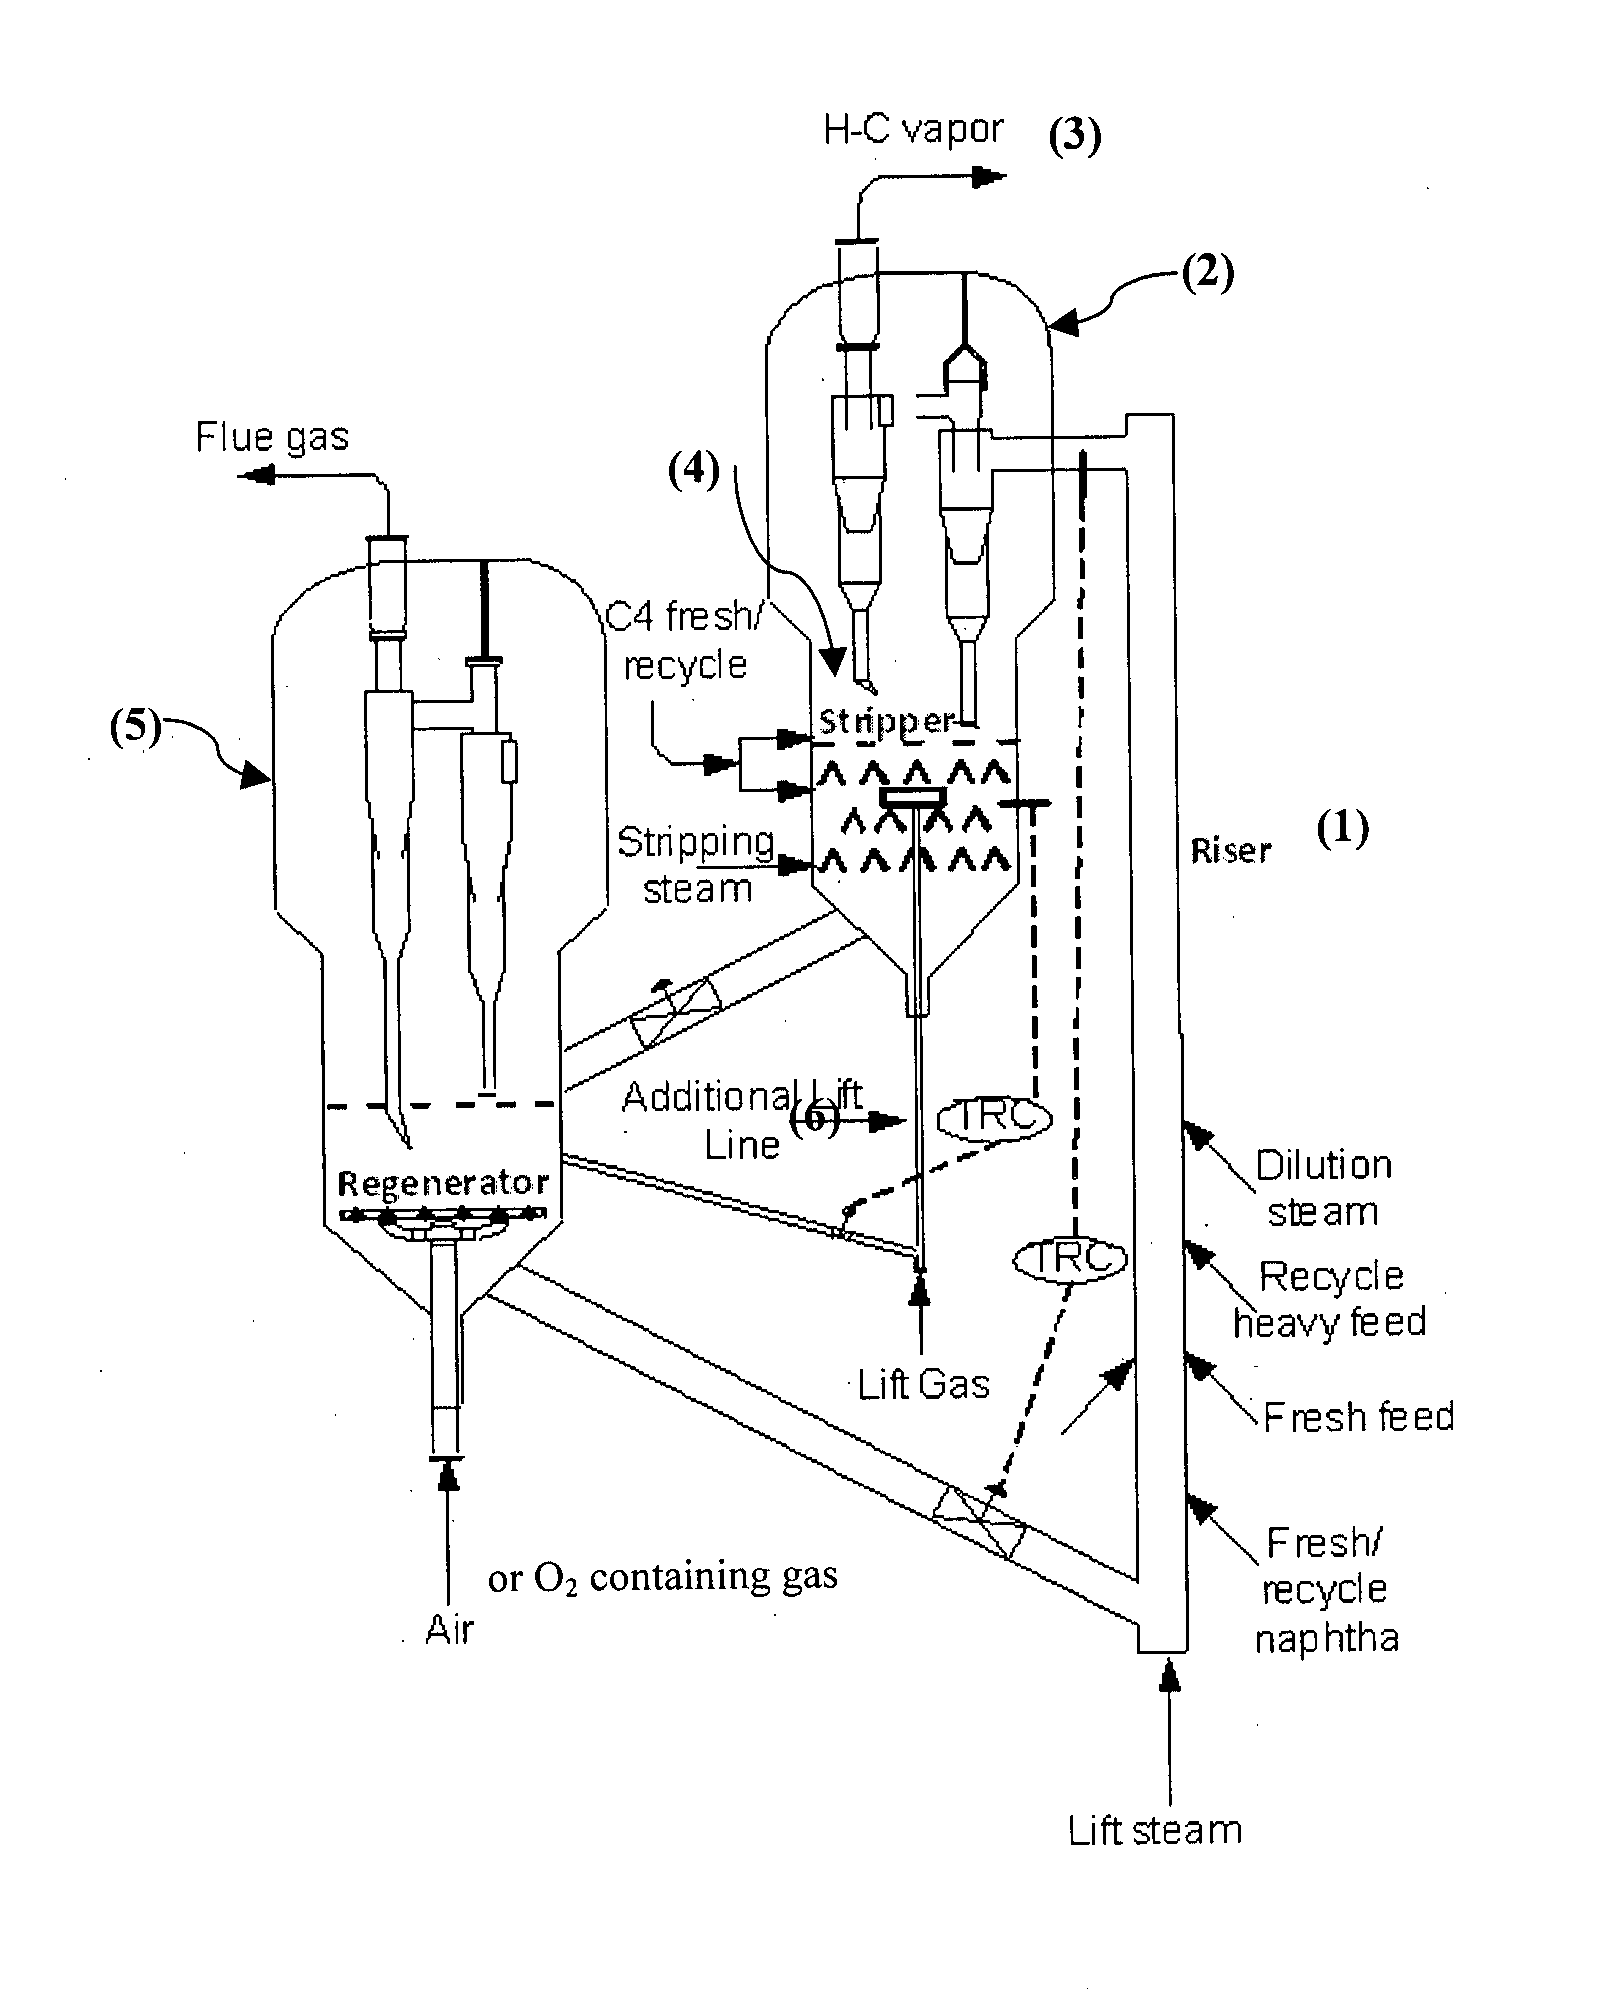 PROCESS FOR PRODUCTION OF C<sub>3</sub> OLEFIN IN A FLUID CATALYTIC CRACKING UNIT